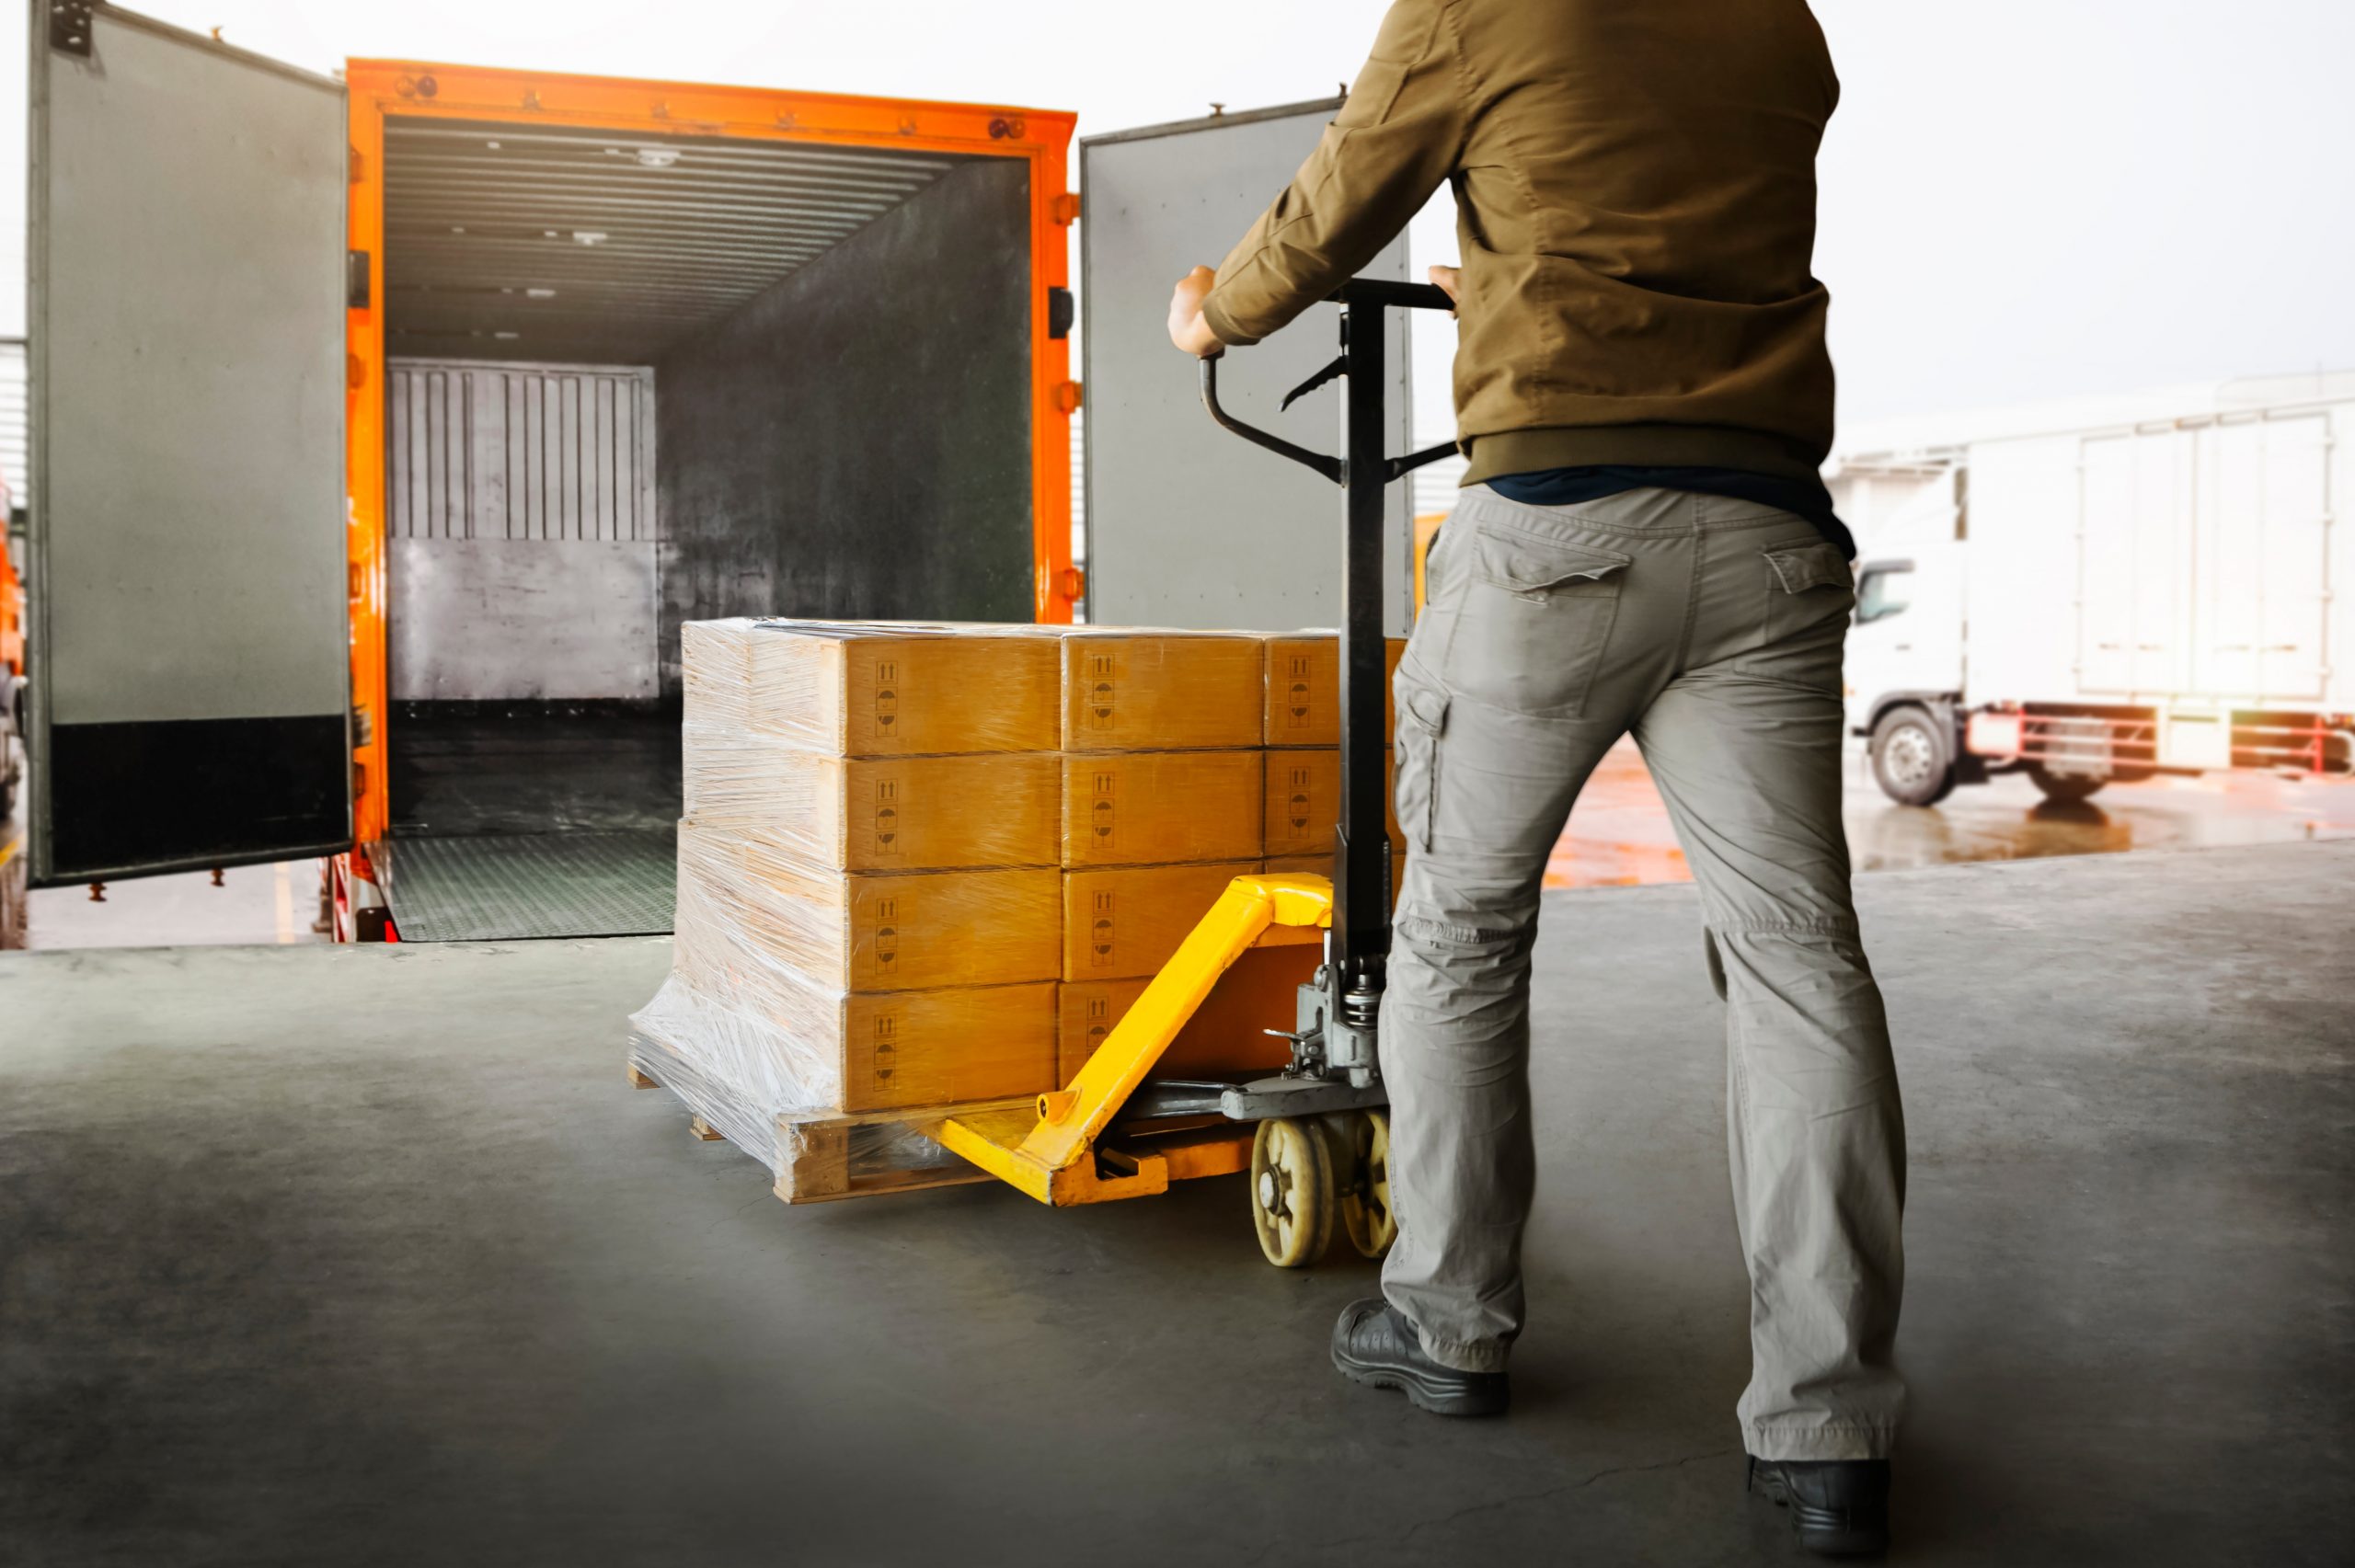 Workers,Unloading,Packaging,Boxes,On,Pallets,Into,The,Cargo,Container